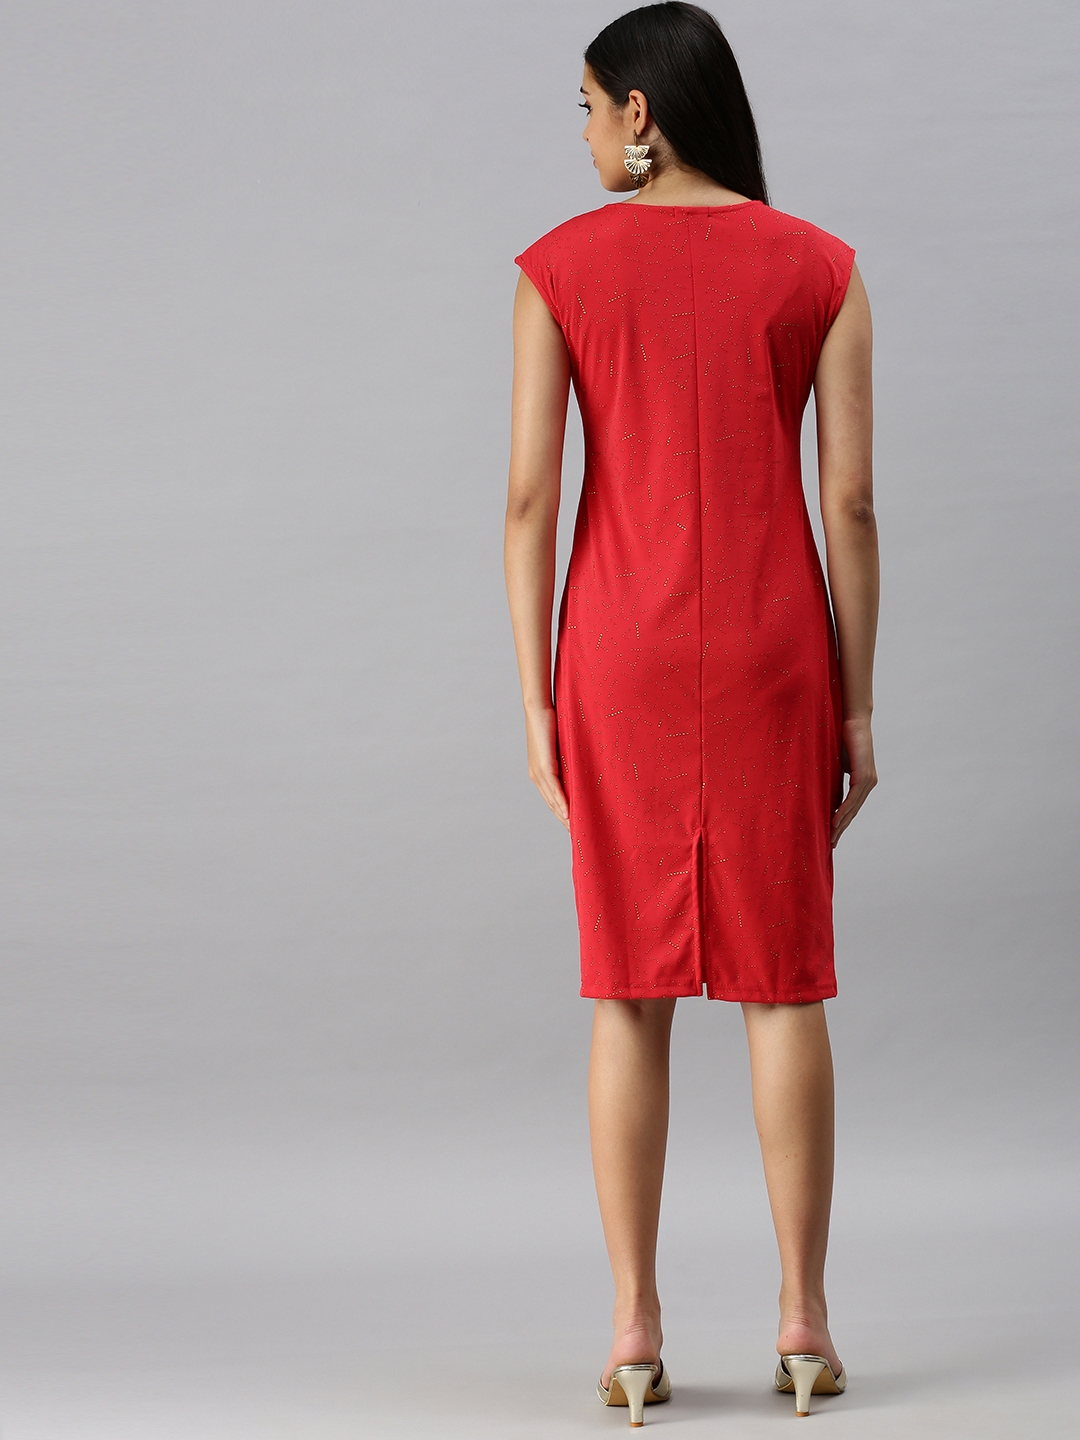 Showoff | SHOWOFF Women Red Solid Round Neck Sleeveless Knee length Sheath Dress 2